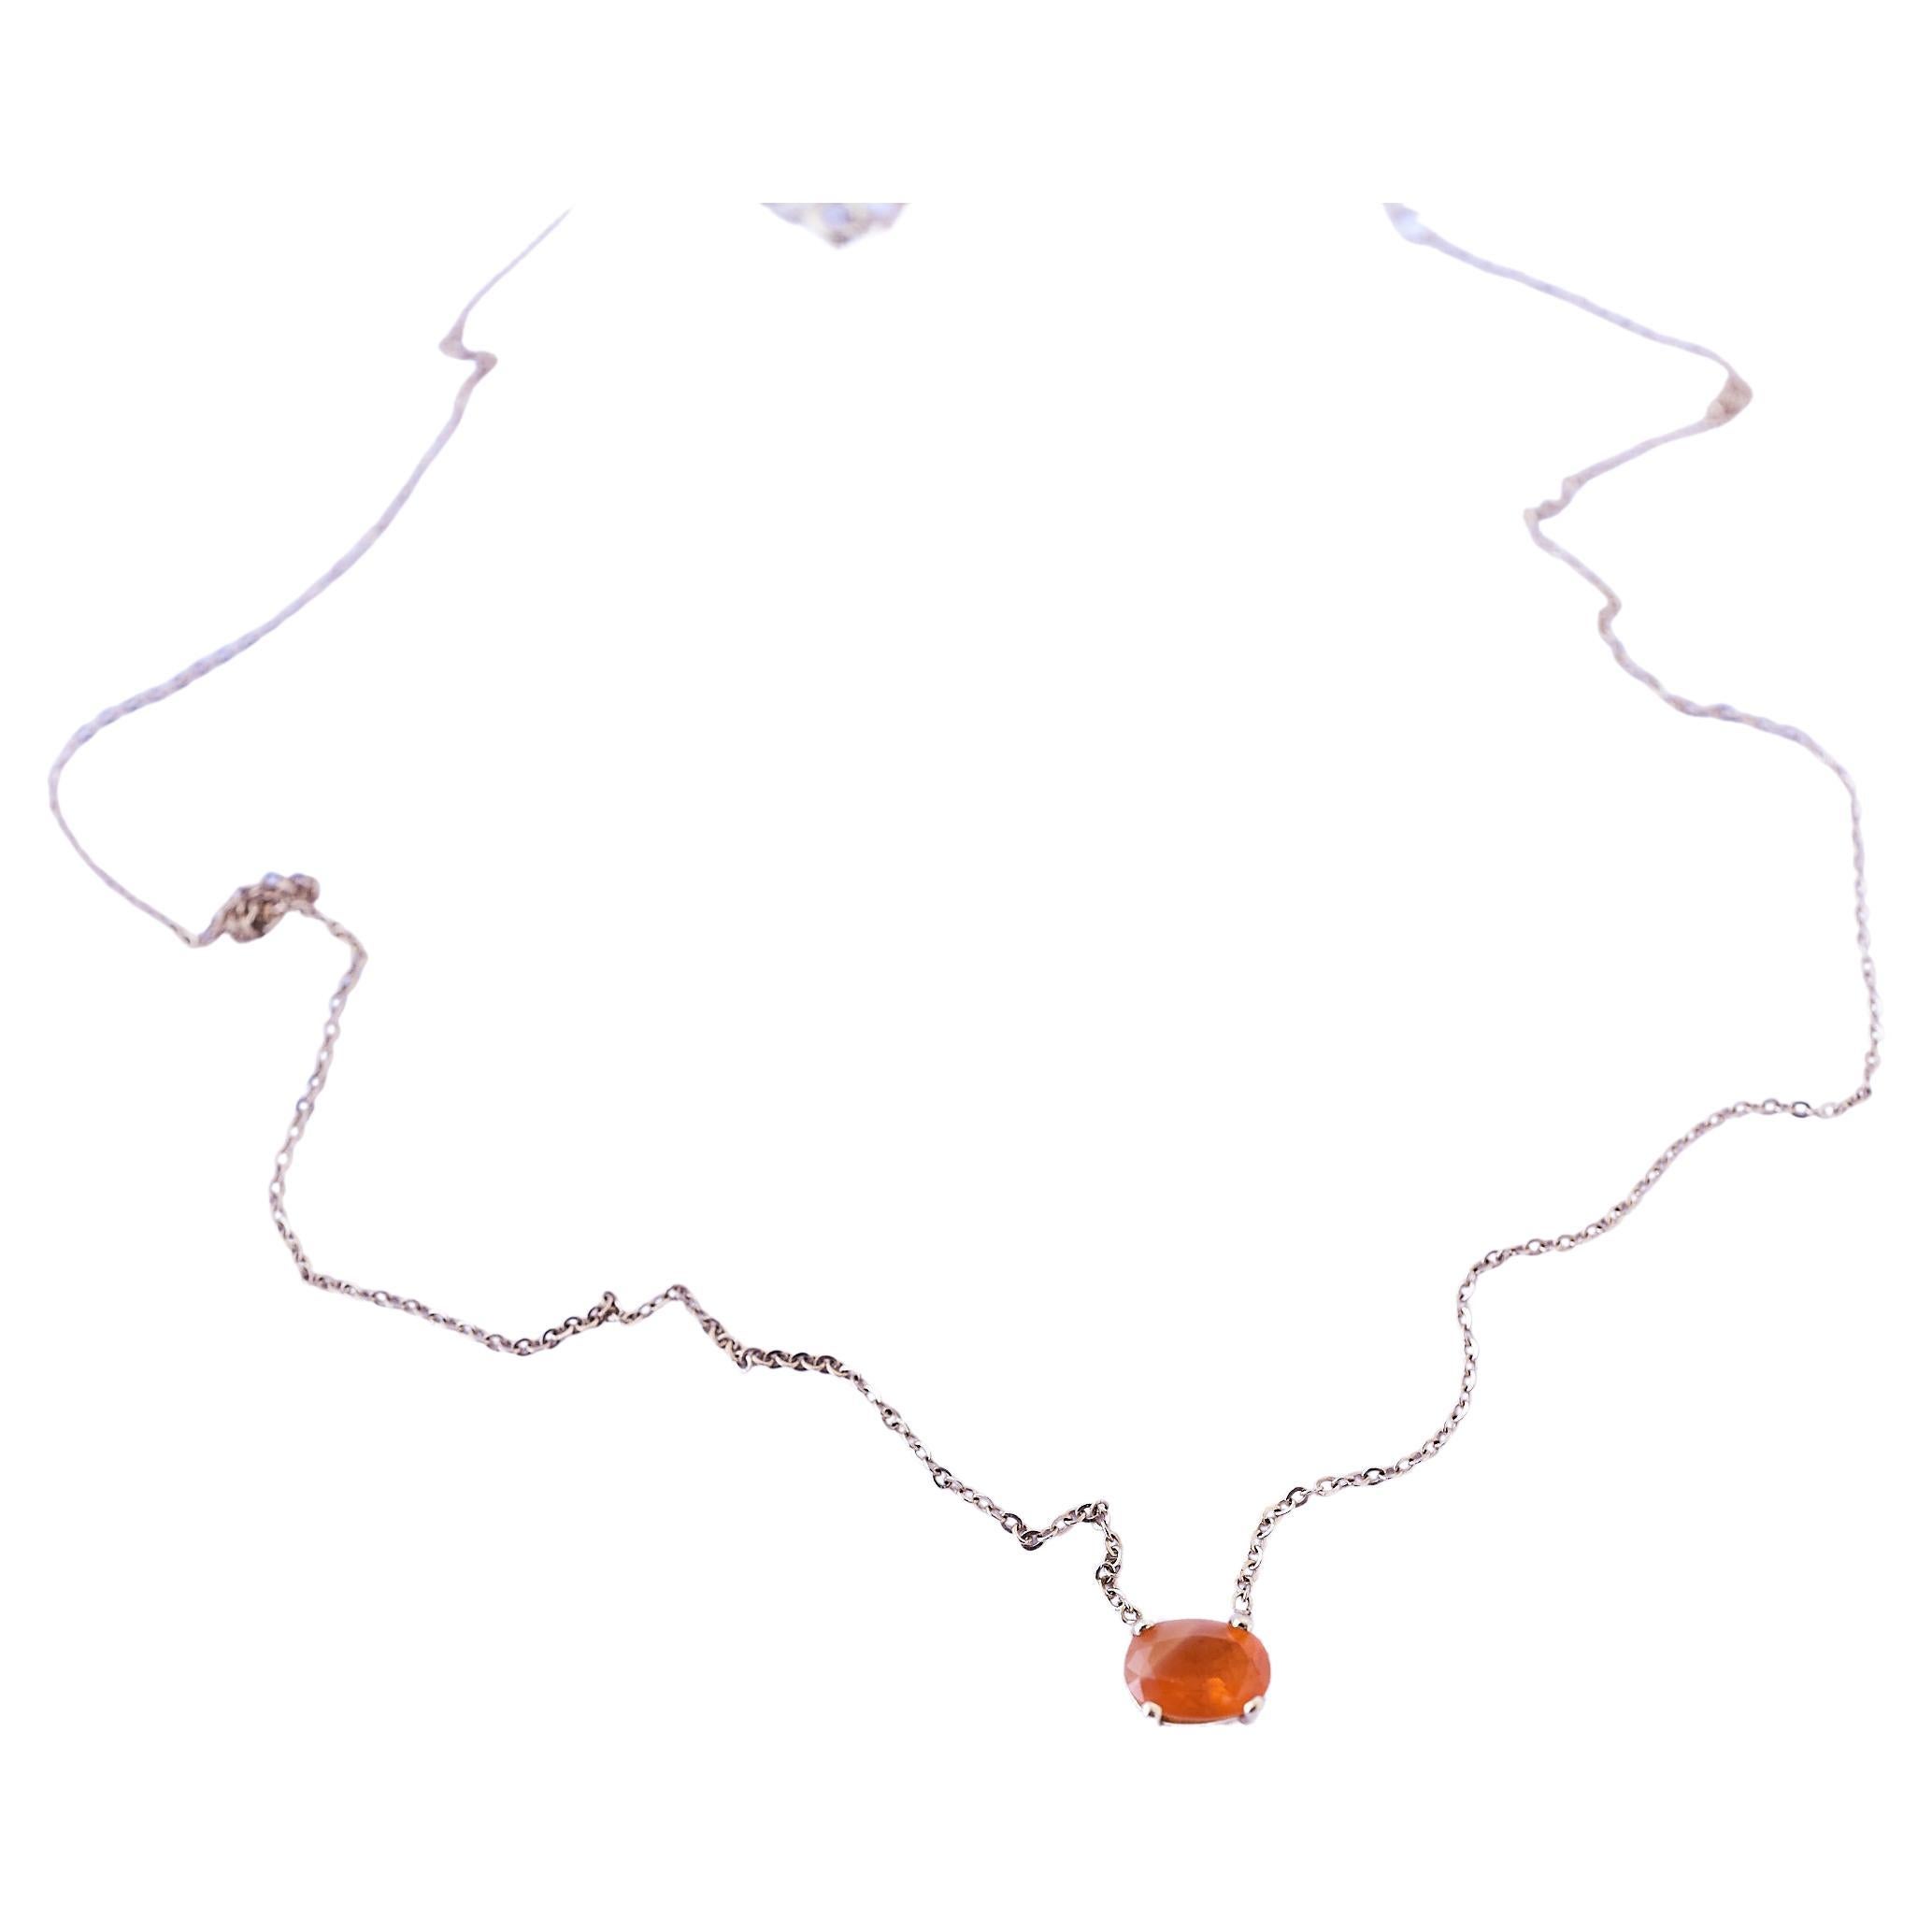 Gem Chain Necklace Choker Fire Opal 14k Gold J Dauphin In New Condition For Sale In Los Angeles, CA